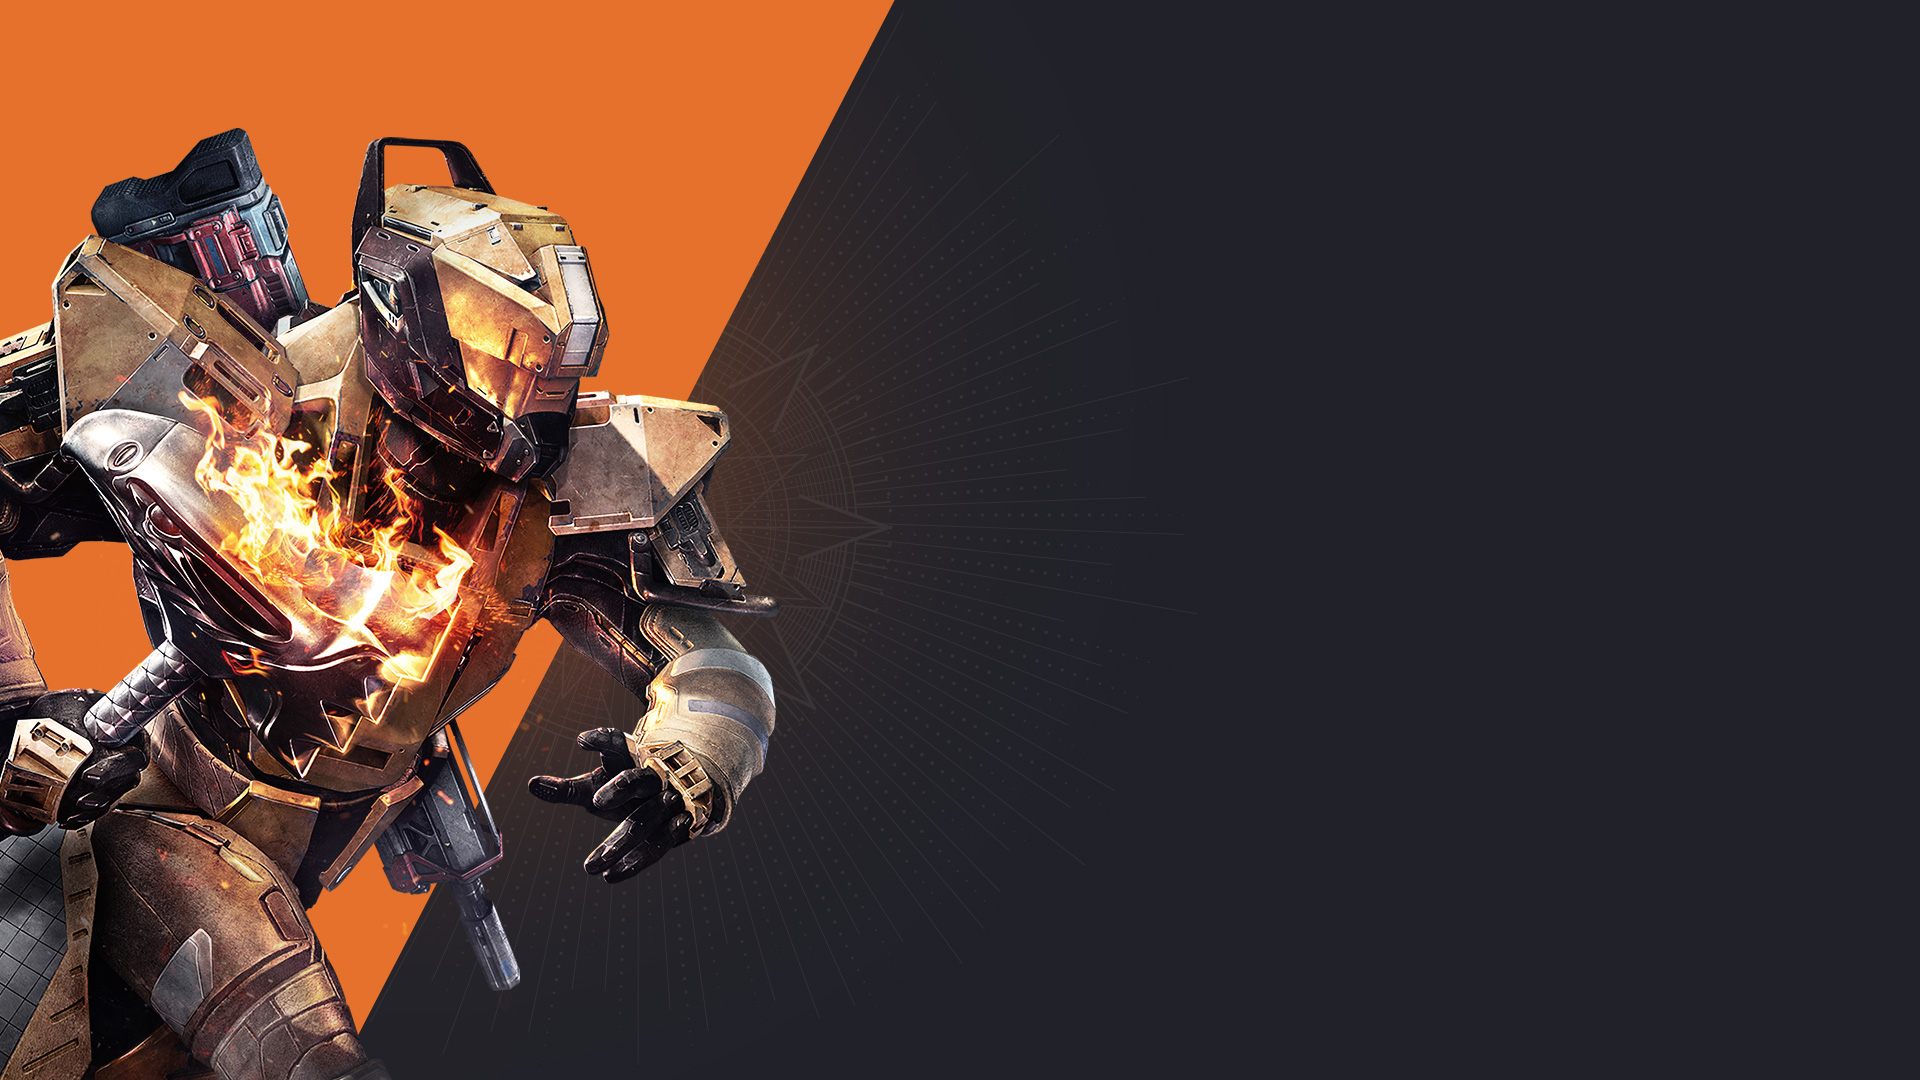 Destiny The Taken King DLC Is Coming September 15 With Exclusive